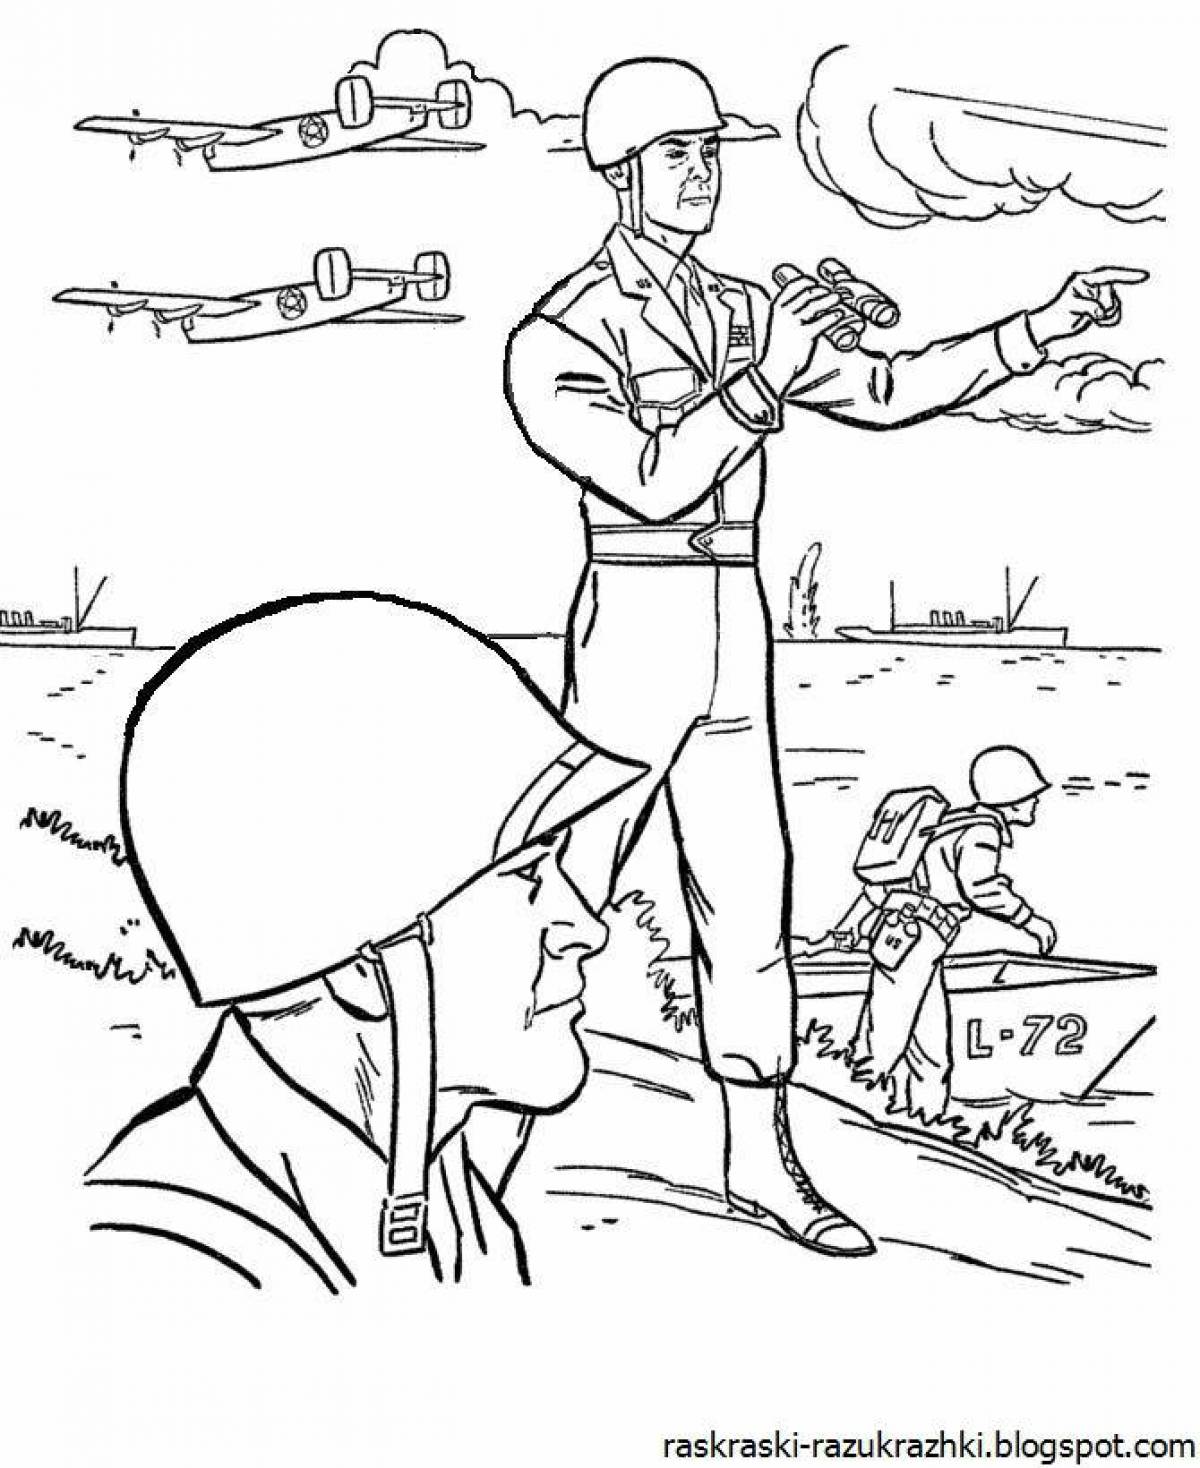 Attractive military coloring book for elementary school kids